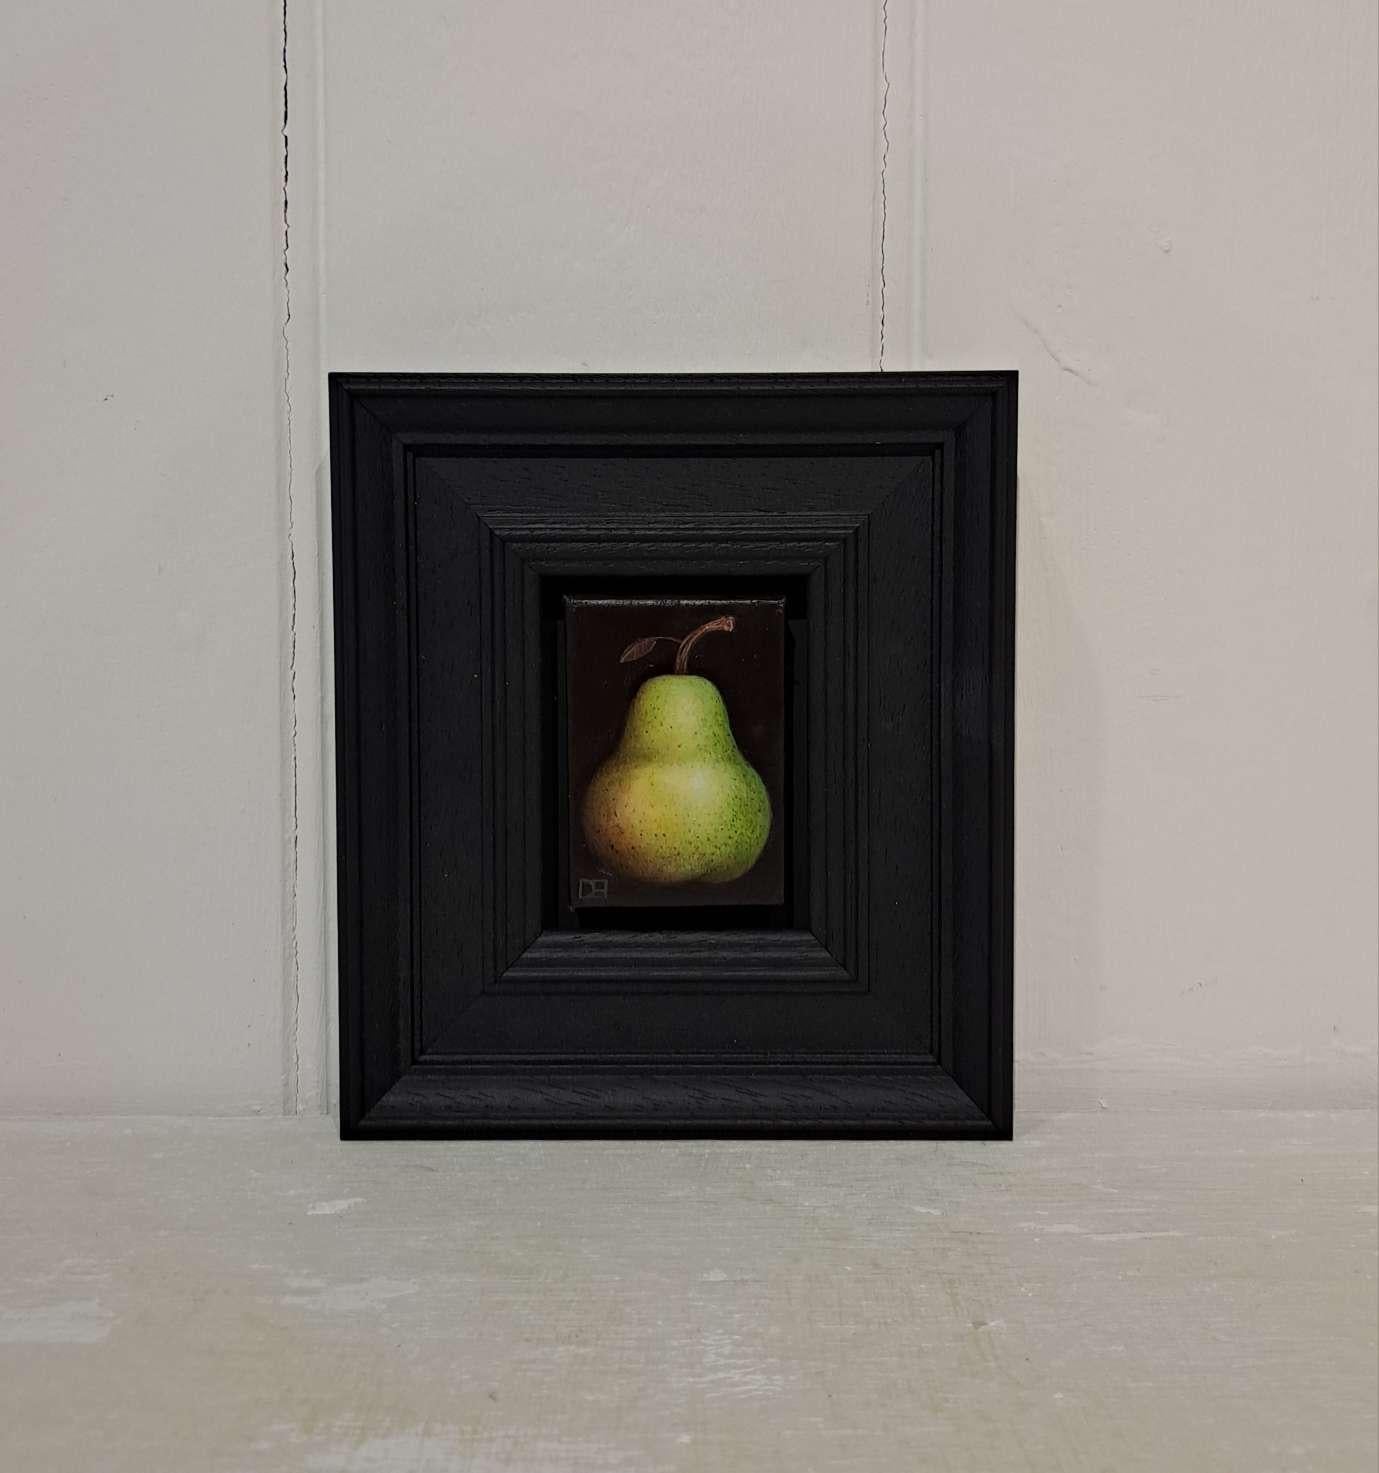 Pocket Green Speckled Pear, fruit art, affordable art, original art - Painting by Dani Humberstone